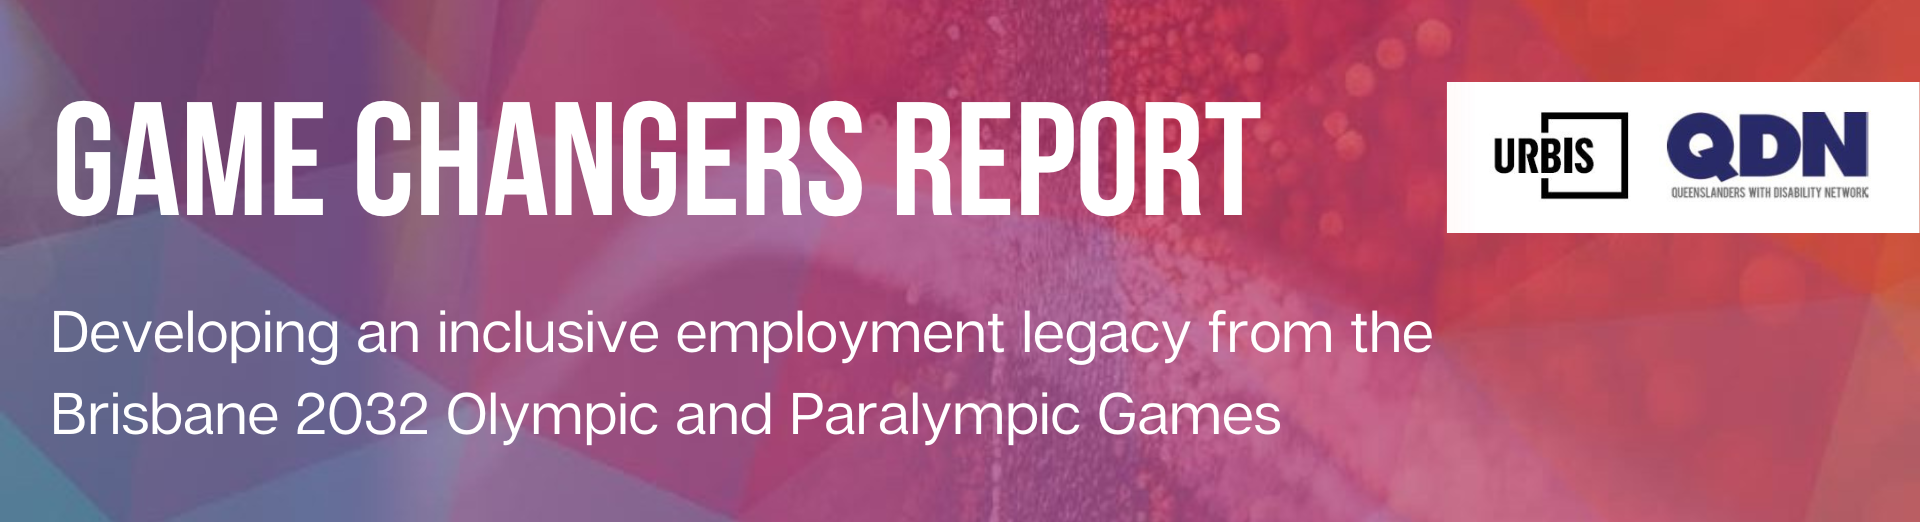 On a colourful background, of blue, purple, pink and orange, there is a white title that says "Game Changers Report". Below this in smaller white text it says "Developing an inclusive employment legacy from the Brisbane 2032 Olympic and Paralympic Games". To the right, there is a white block that has two logos on it for Urbis and QDN. 